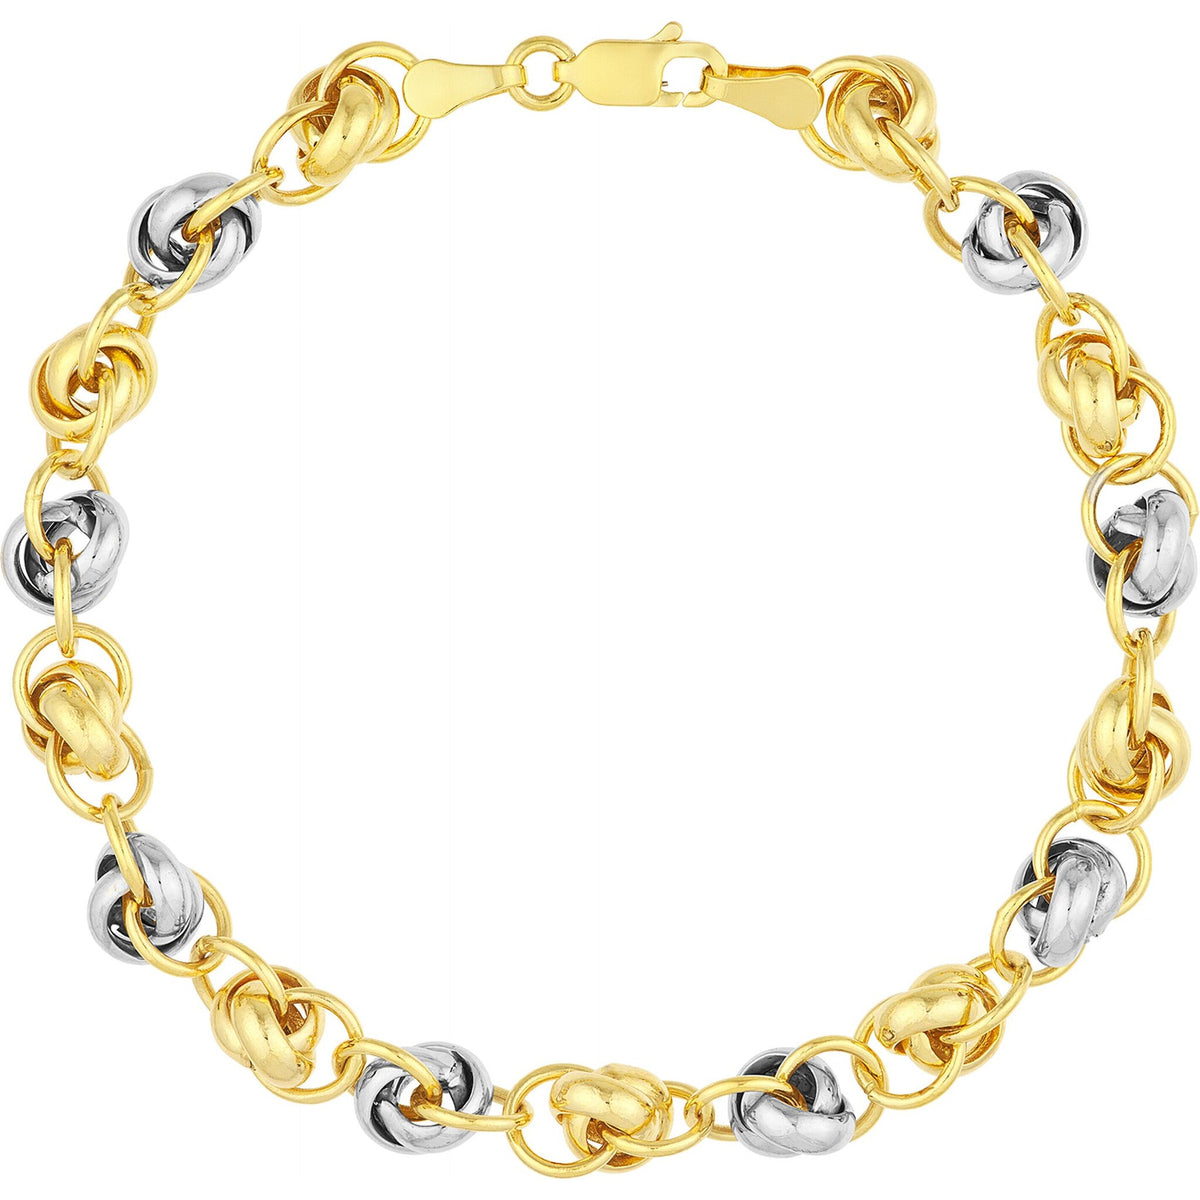 Olas d'Oro 7.5" Bracelet - 14K Yellow and White Gold Two-Tone Knotted Link Chain Bracelet